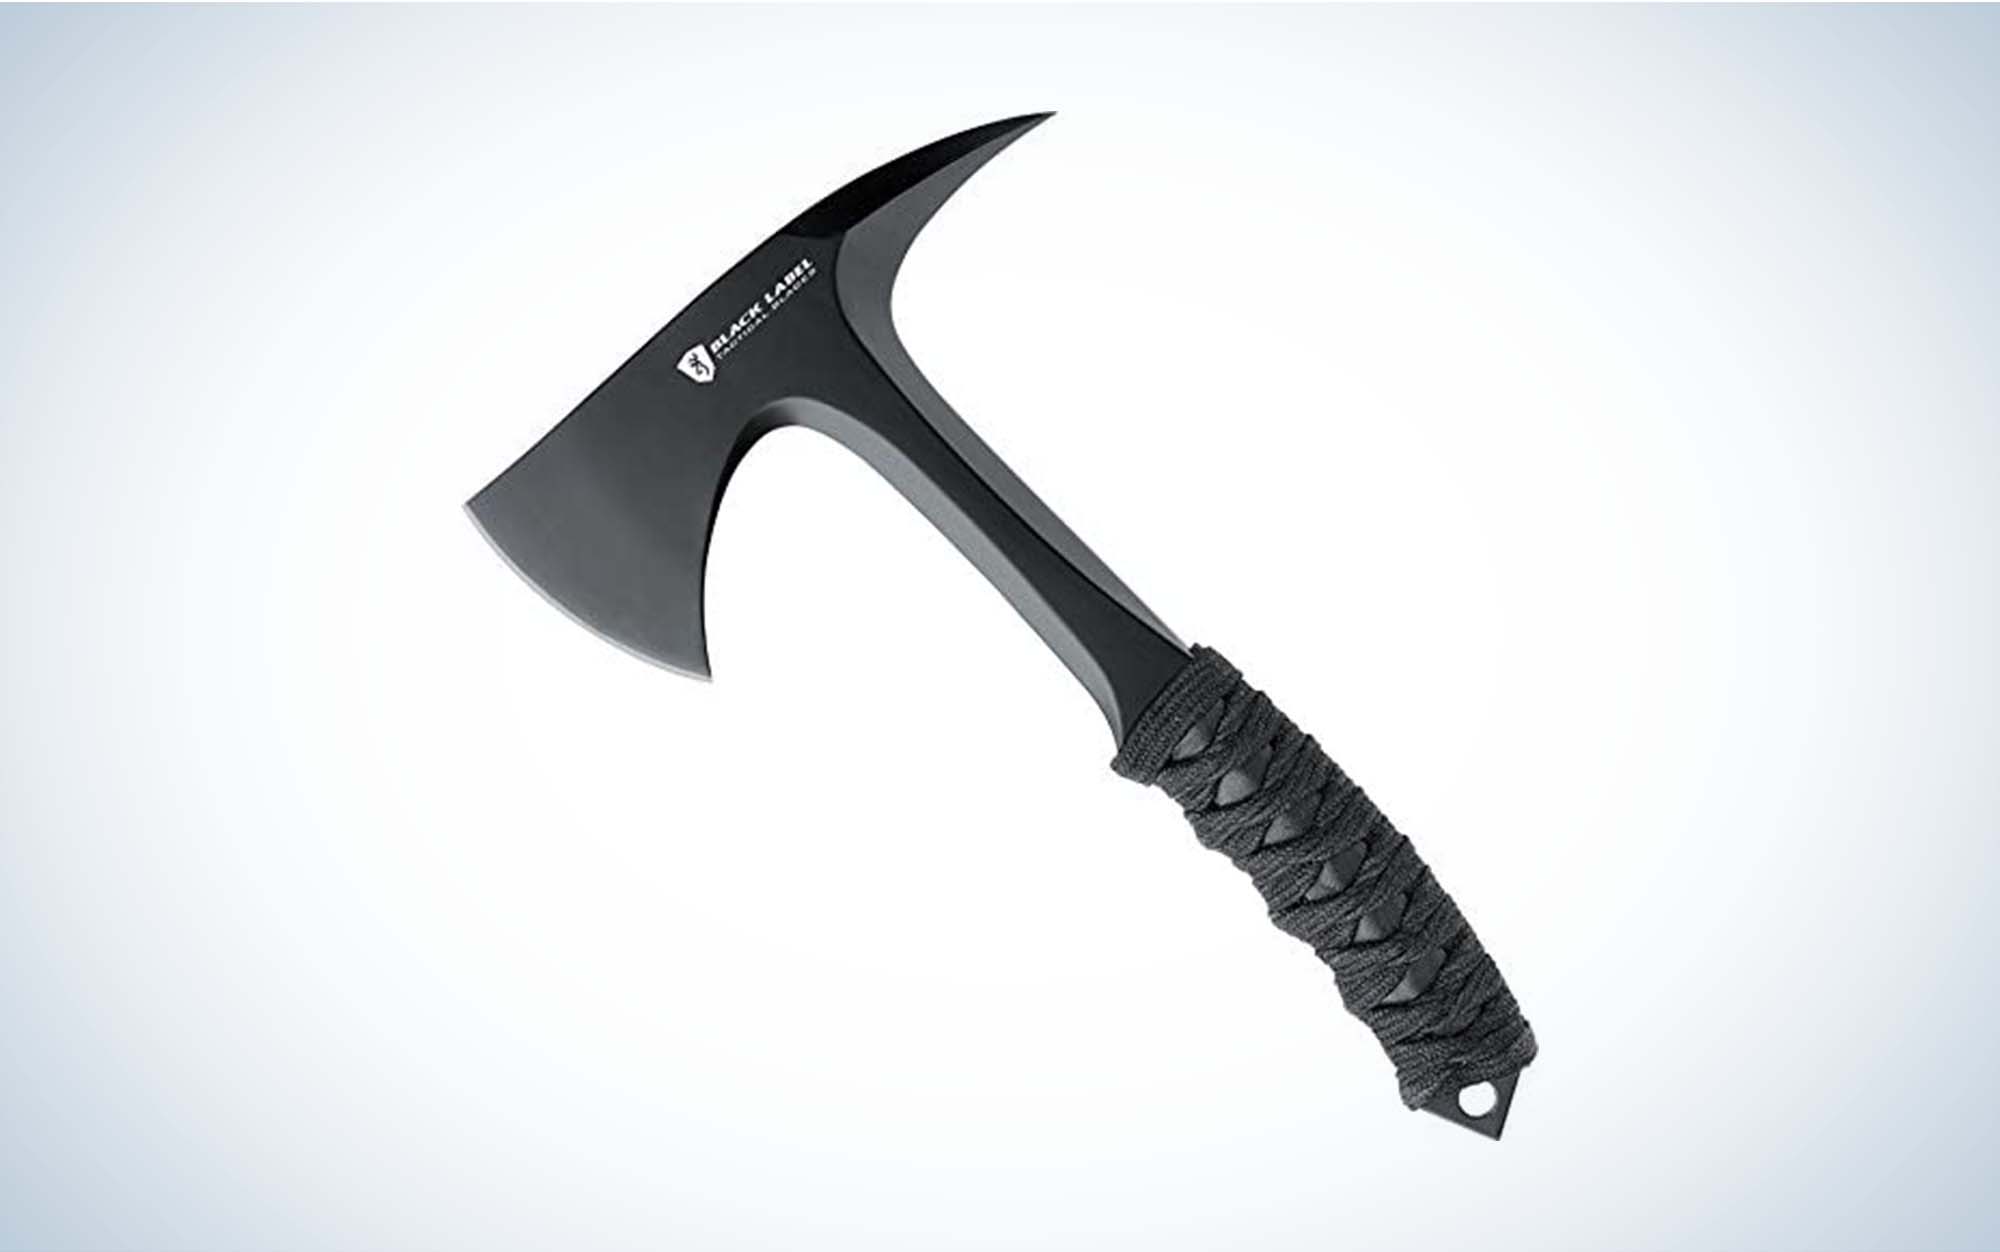 The Browning Black Label Shock N’ Awe Tomahawk is the best compact tomahawk.